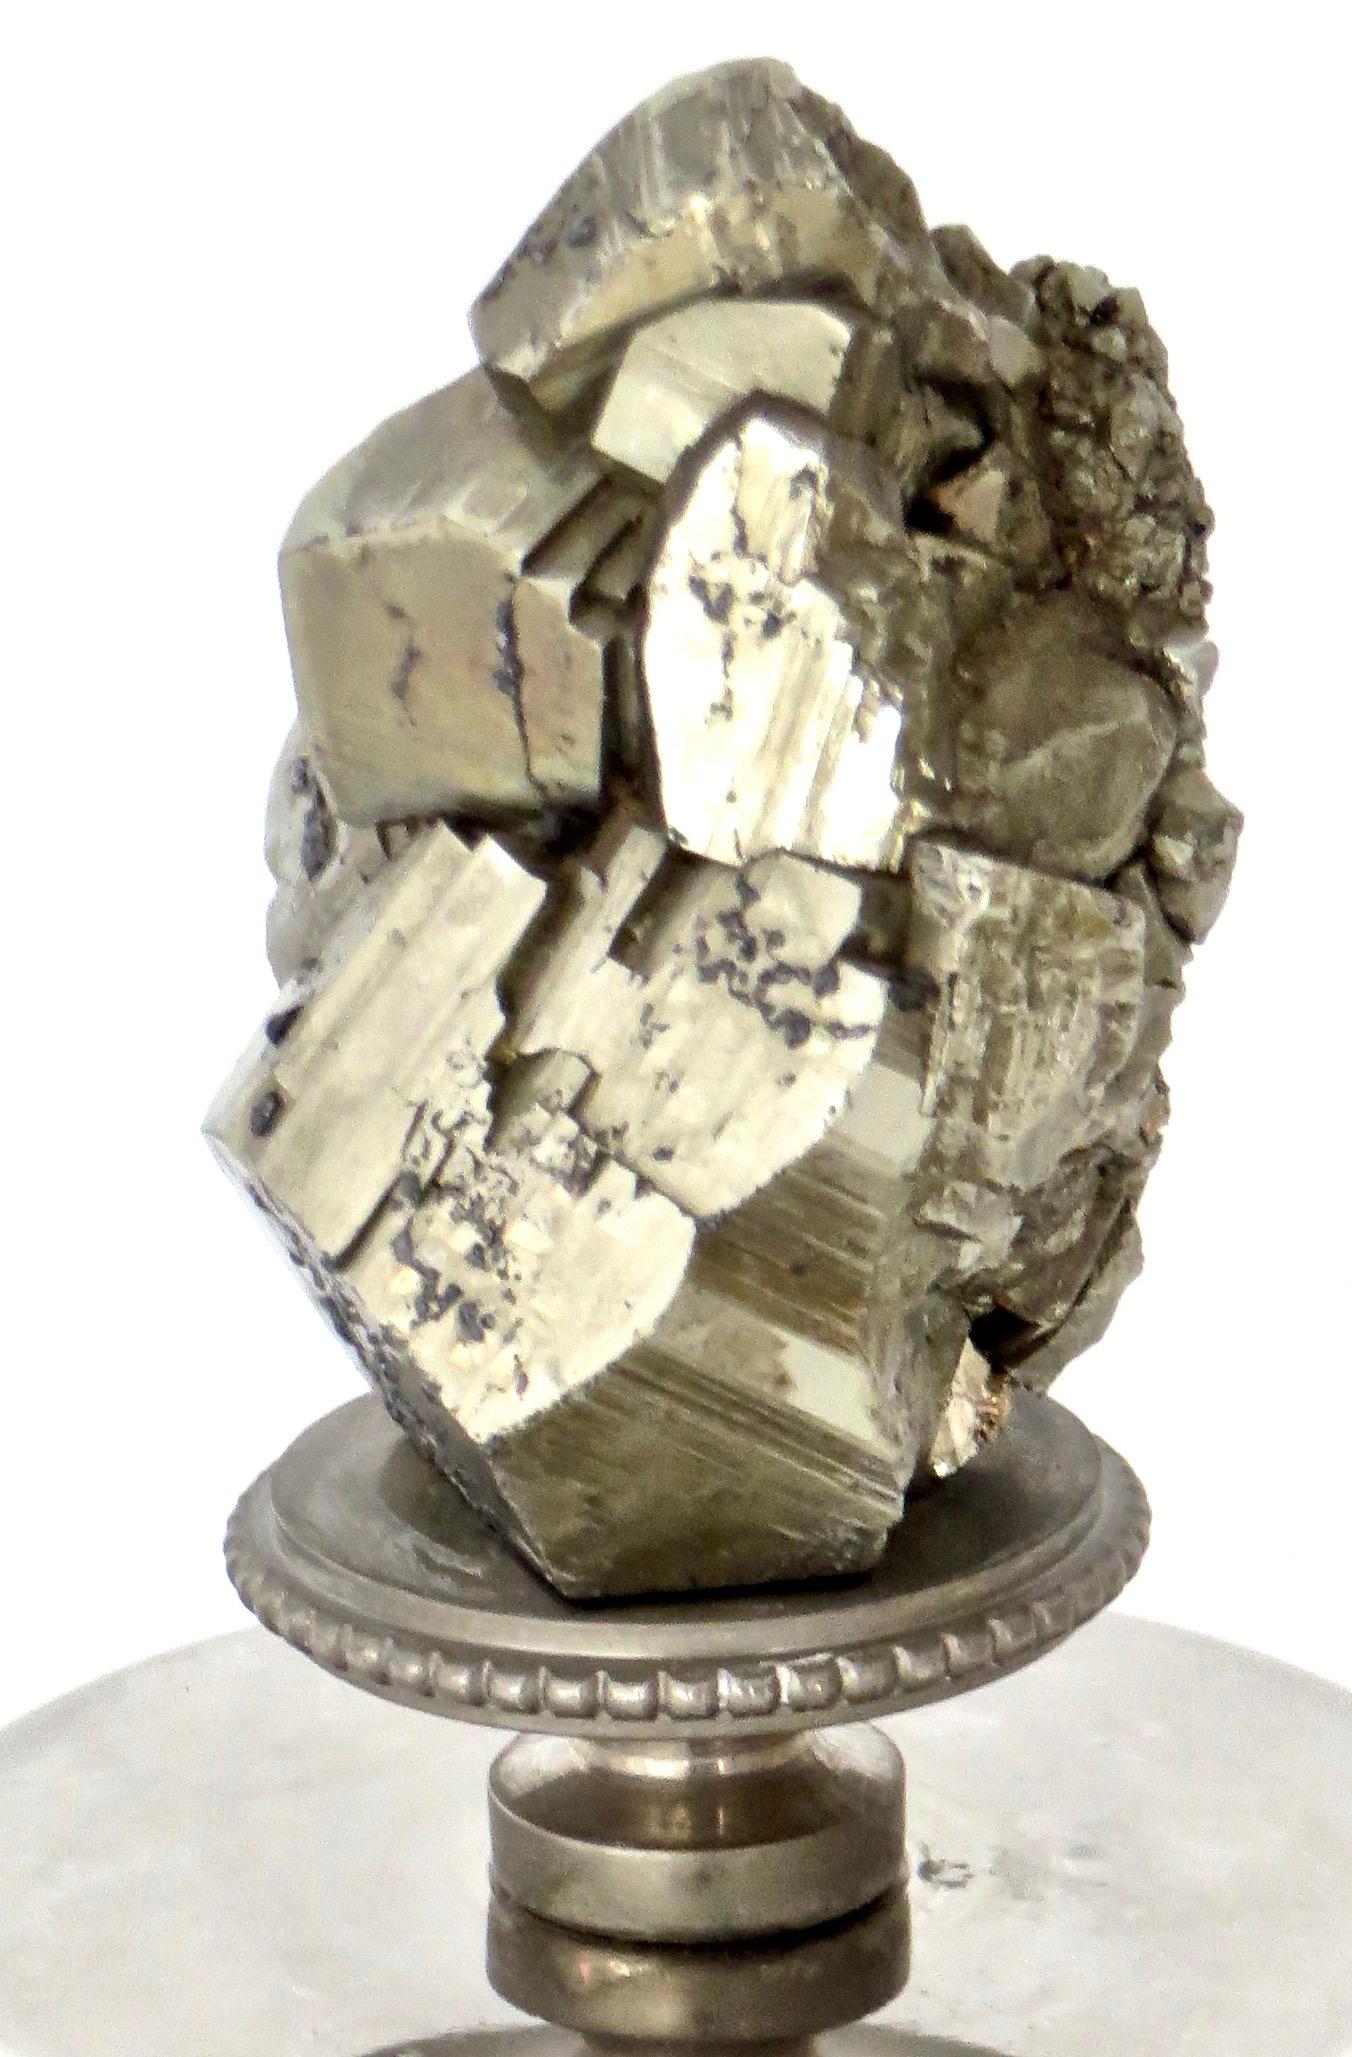 A large attribute to Christian Dior Carafe stopper with a large natural specimen of pyrite mineral.
Overall size: 2.5